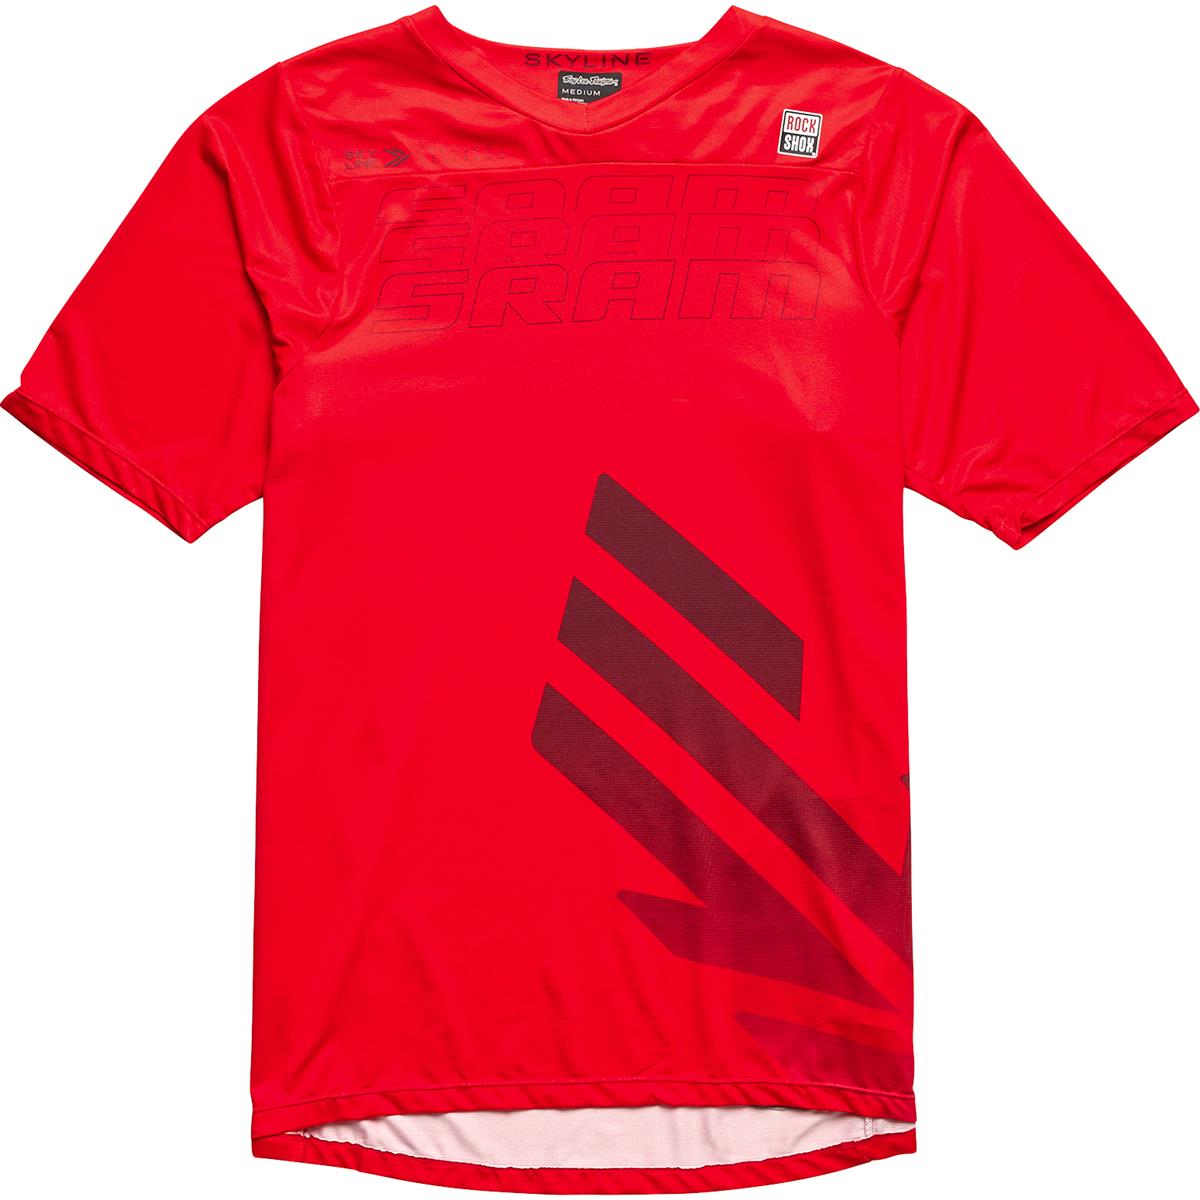 Troy Lee Designs Maillot VTT manches courtes Skyline Sram - Eagle One Fiery Red